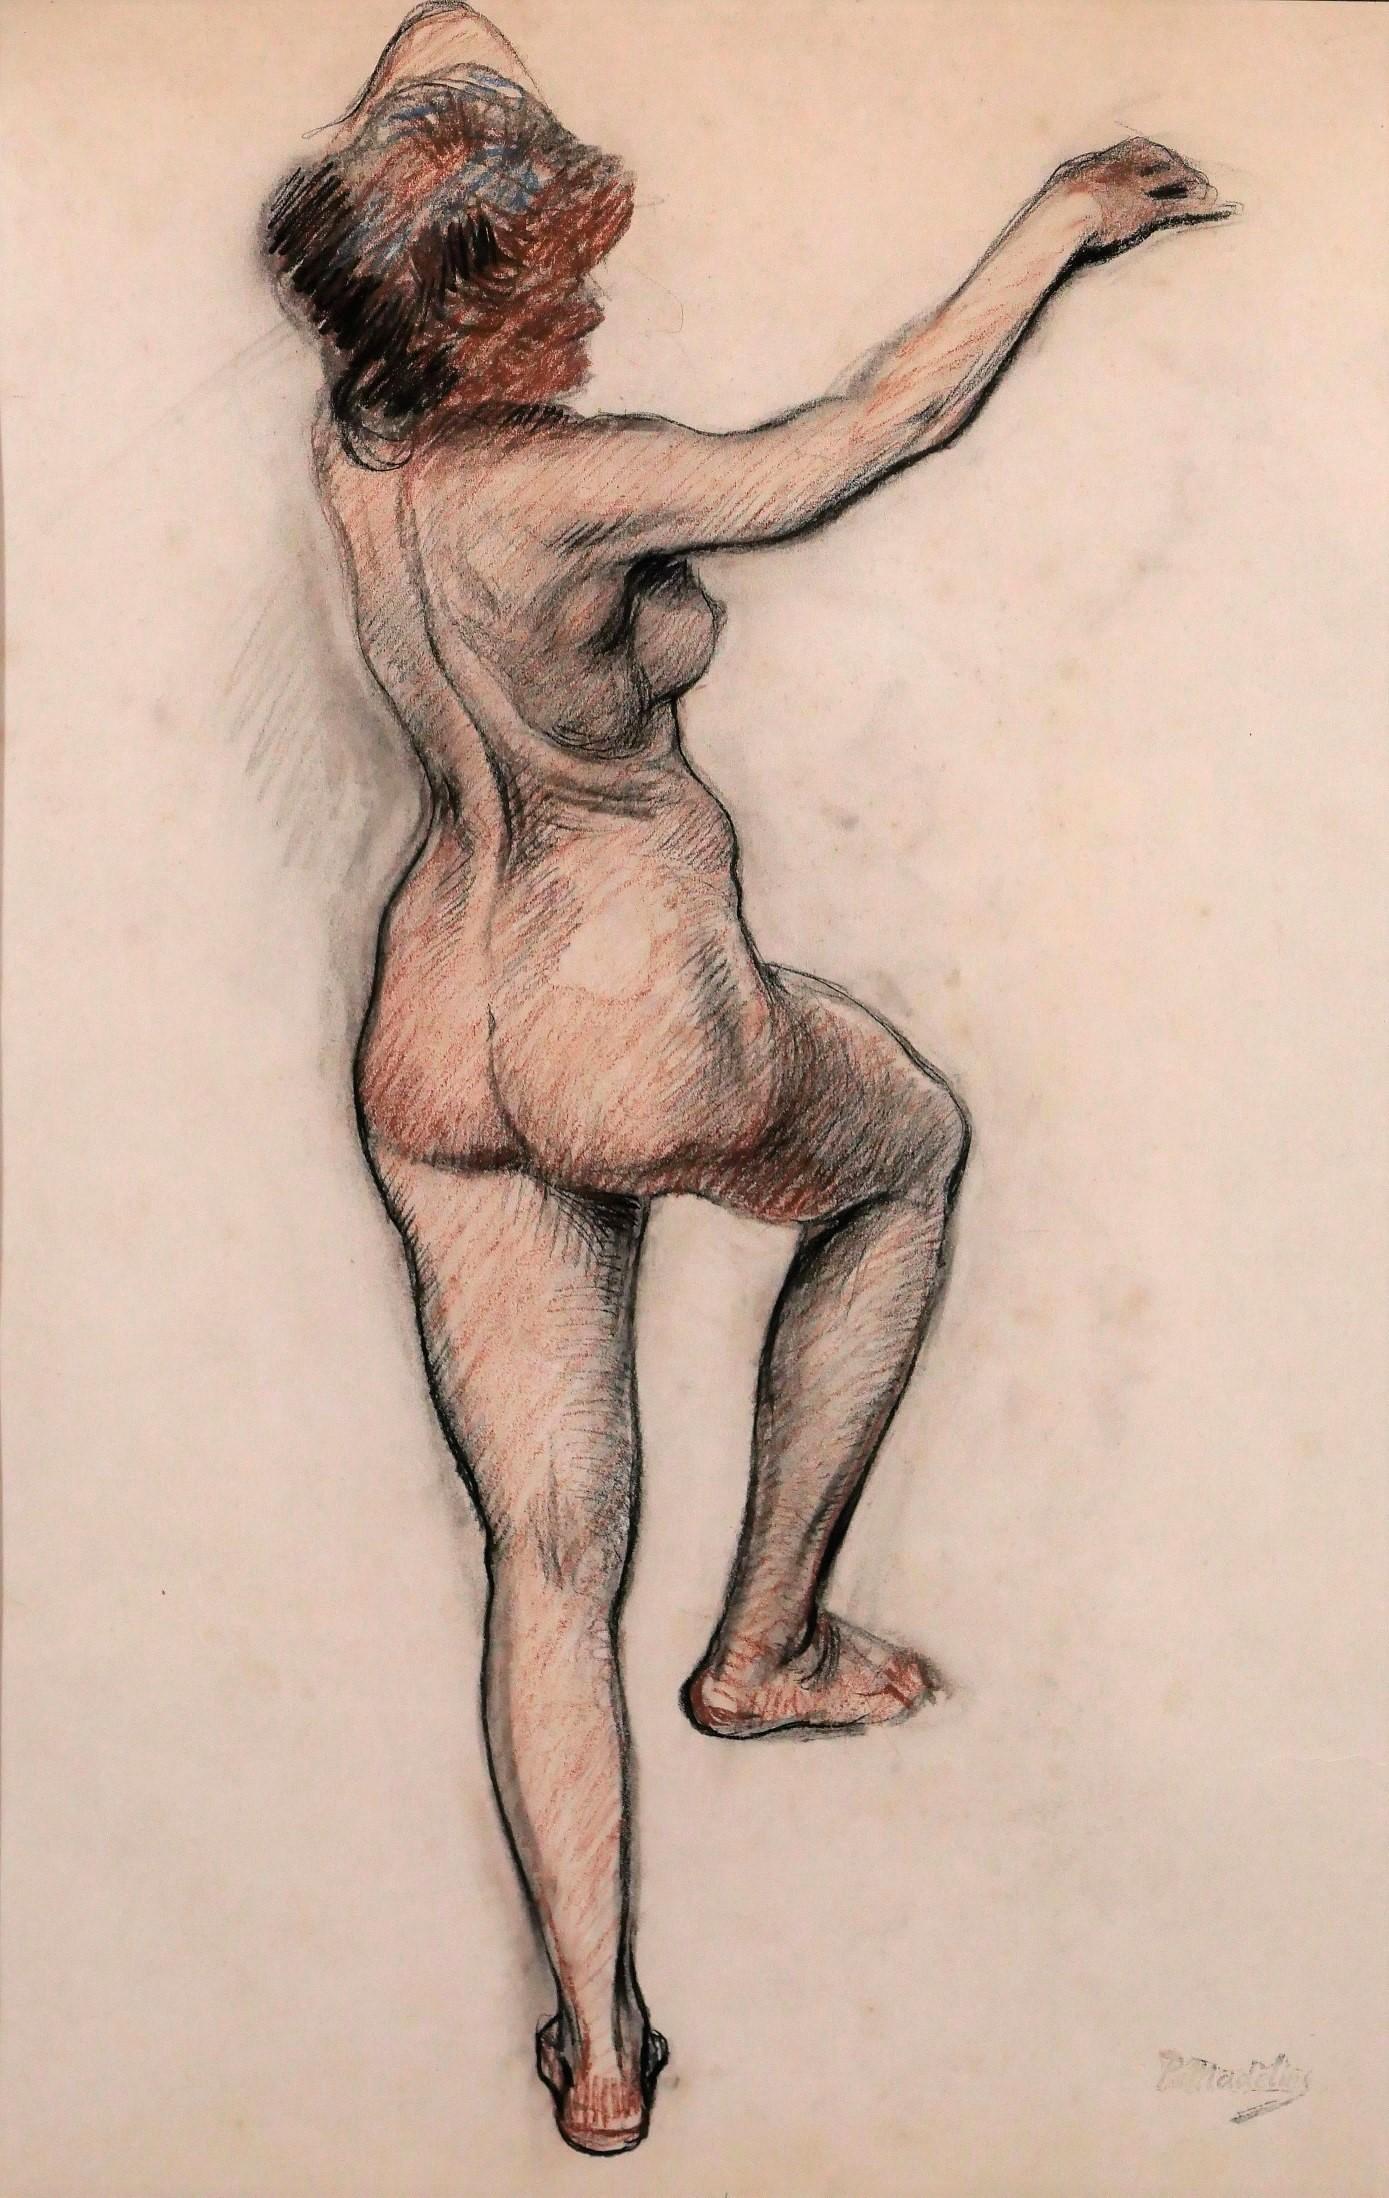 Early 1900s Nude Drawings and Watercolors